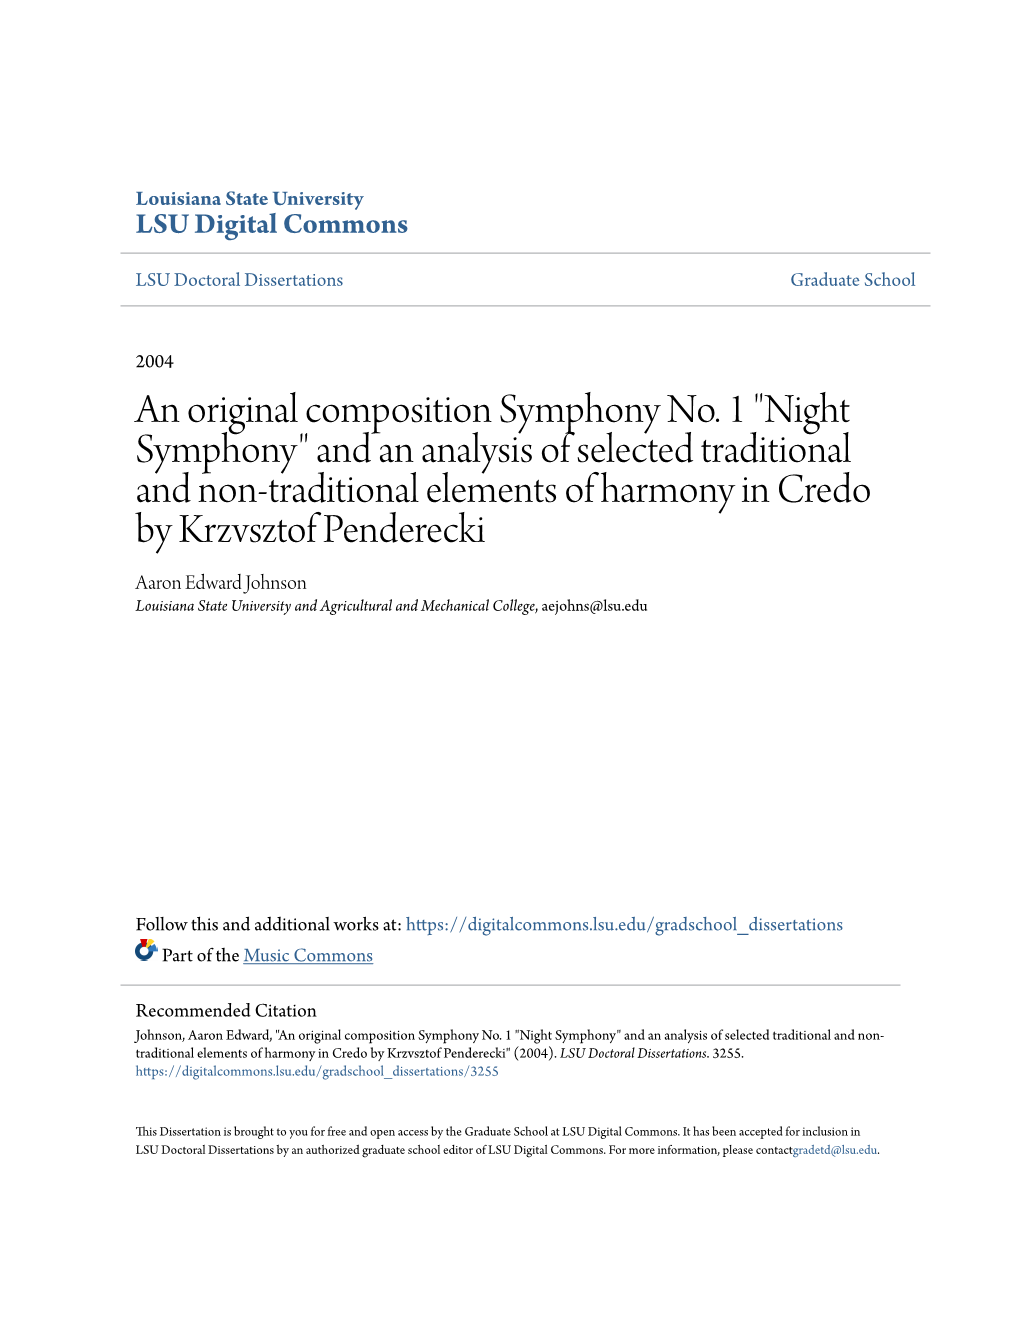 "Night Symphony" and an Analysis of Selected Traditional And